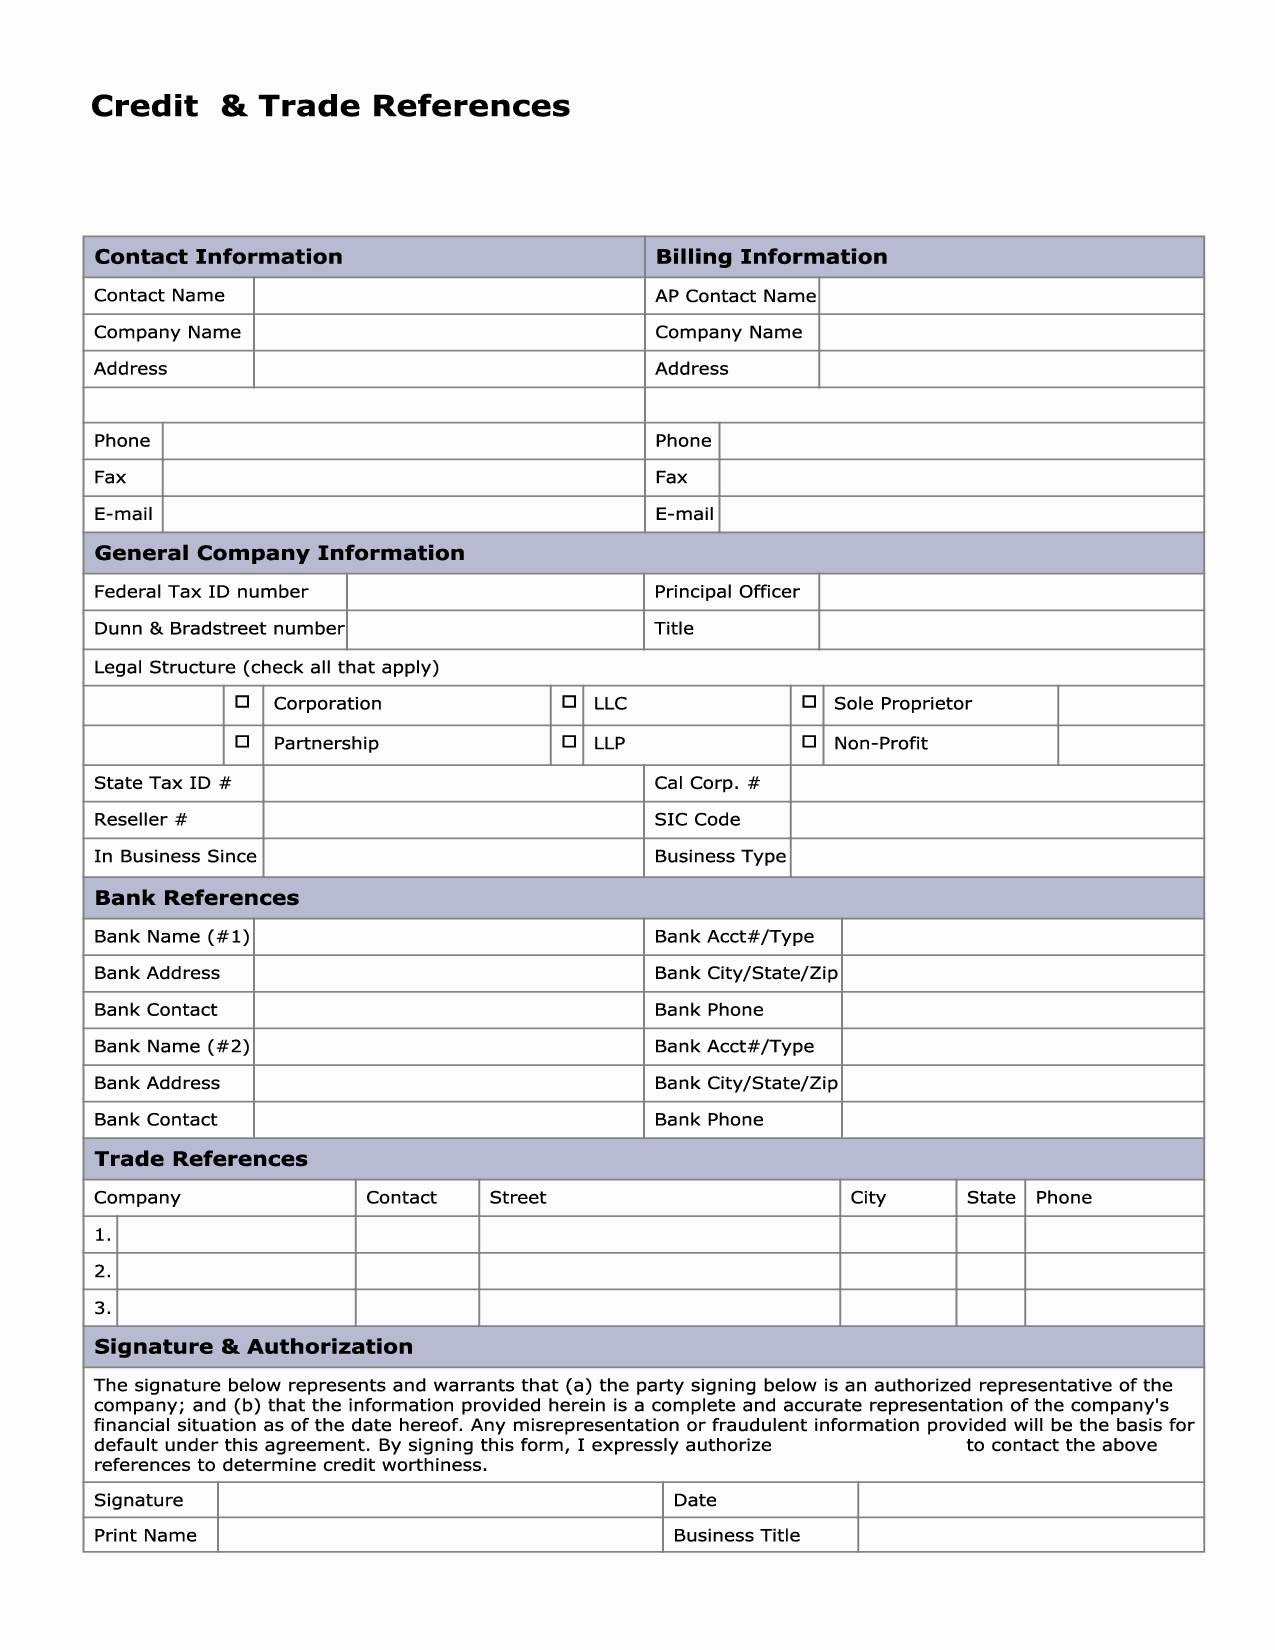 Credit Request form Awesome Trade Reference Sheet Template